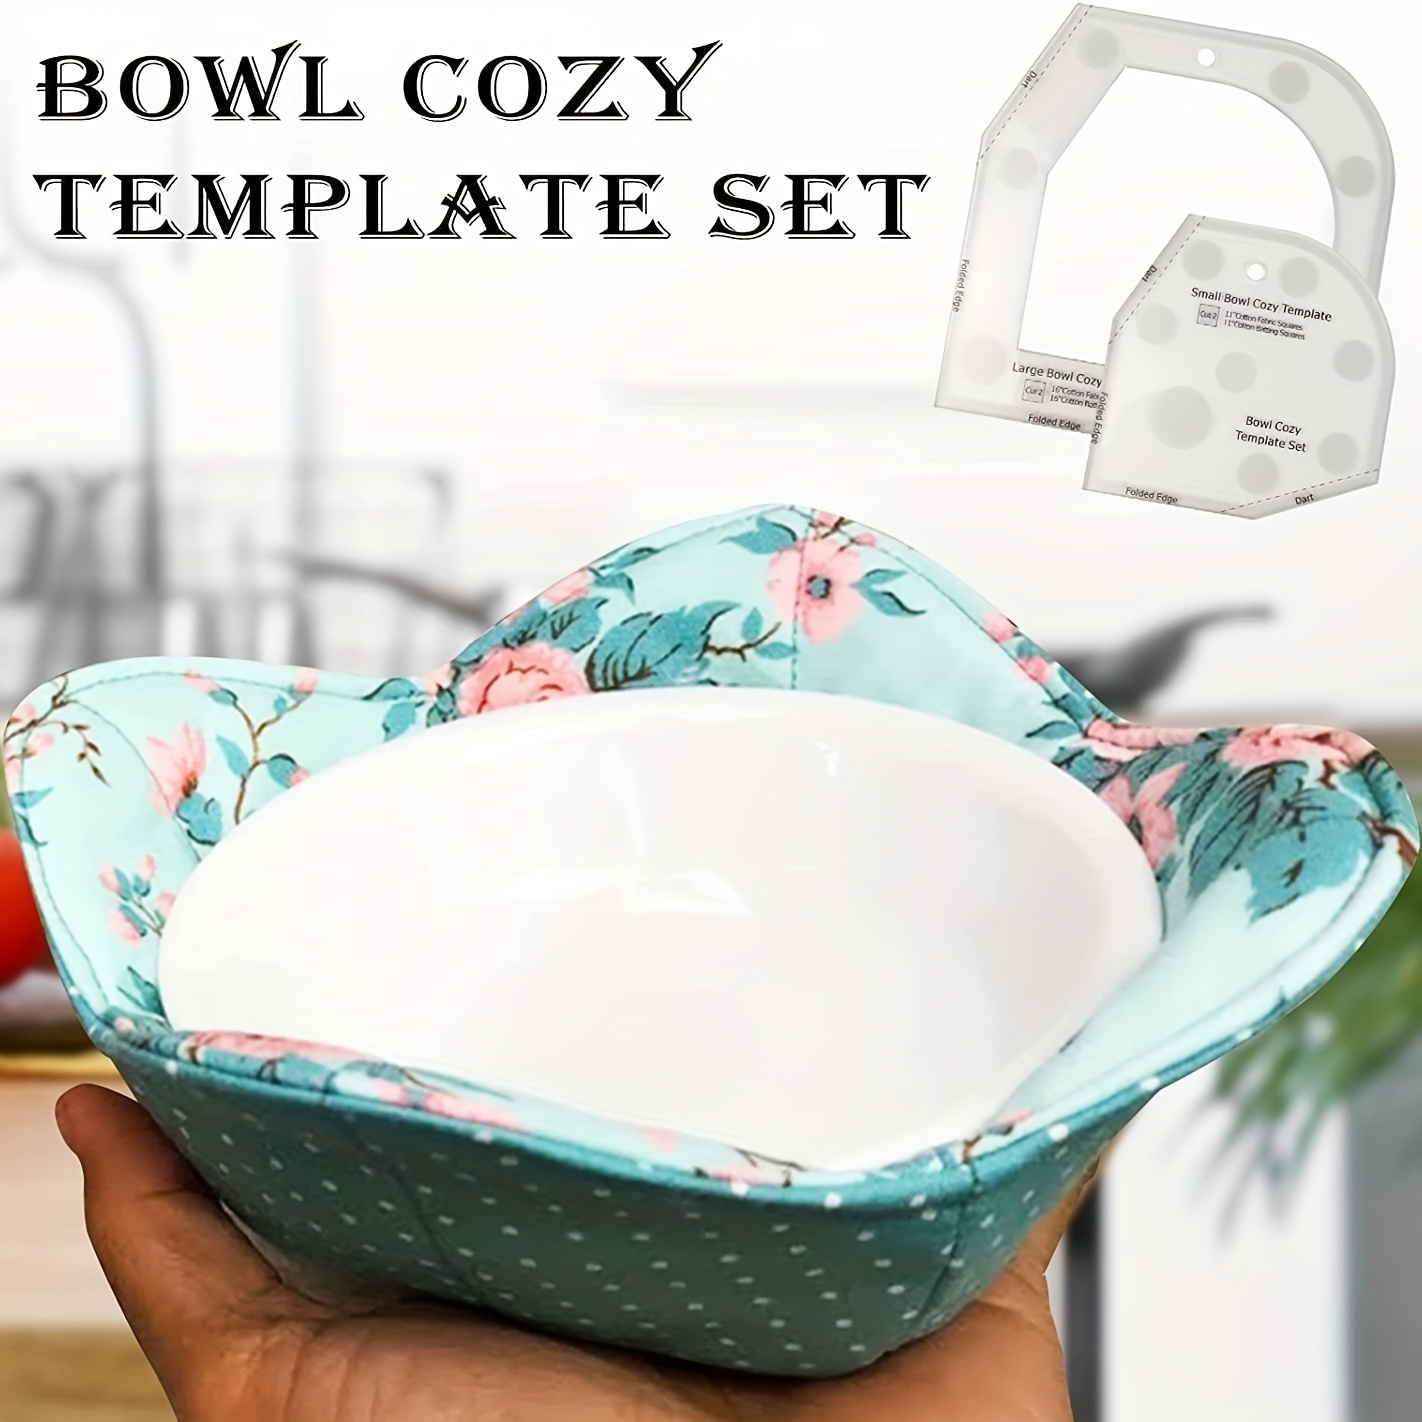 MICROWAVE BOWL COZY, Set of 2, Bowl Cozies, Fast Shipping